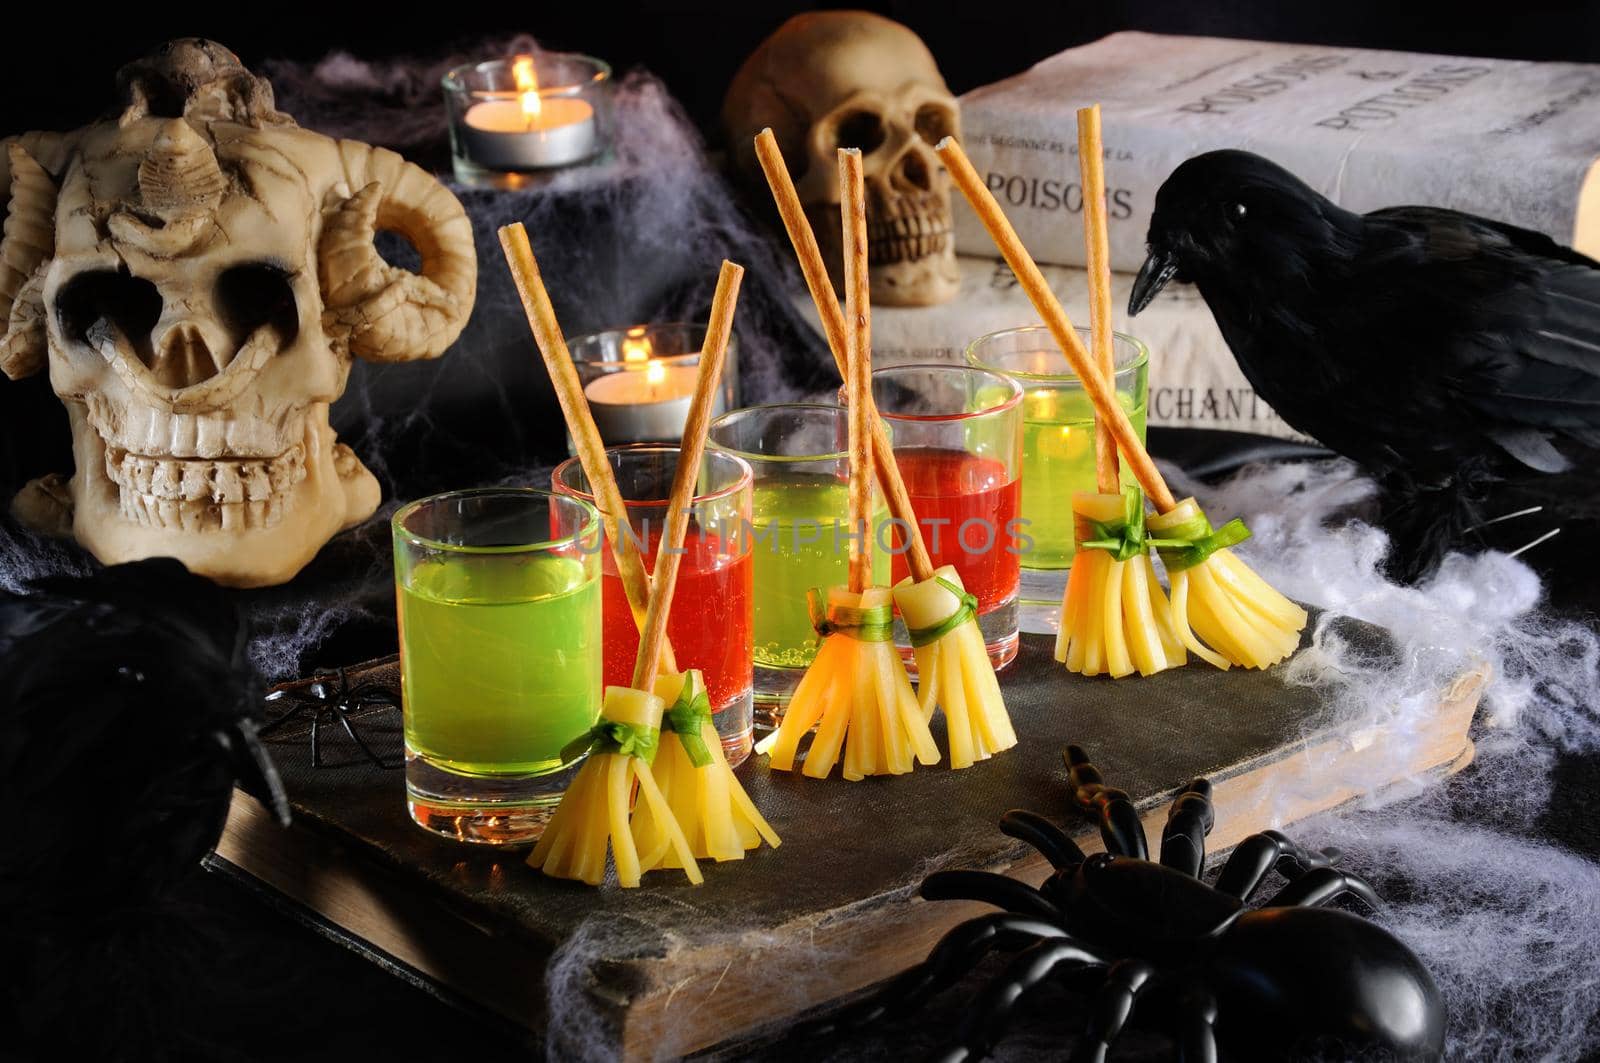 Witch broom made of cheese and bread straw. The original idea of serving snacks to drinks.